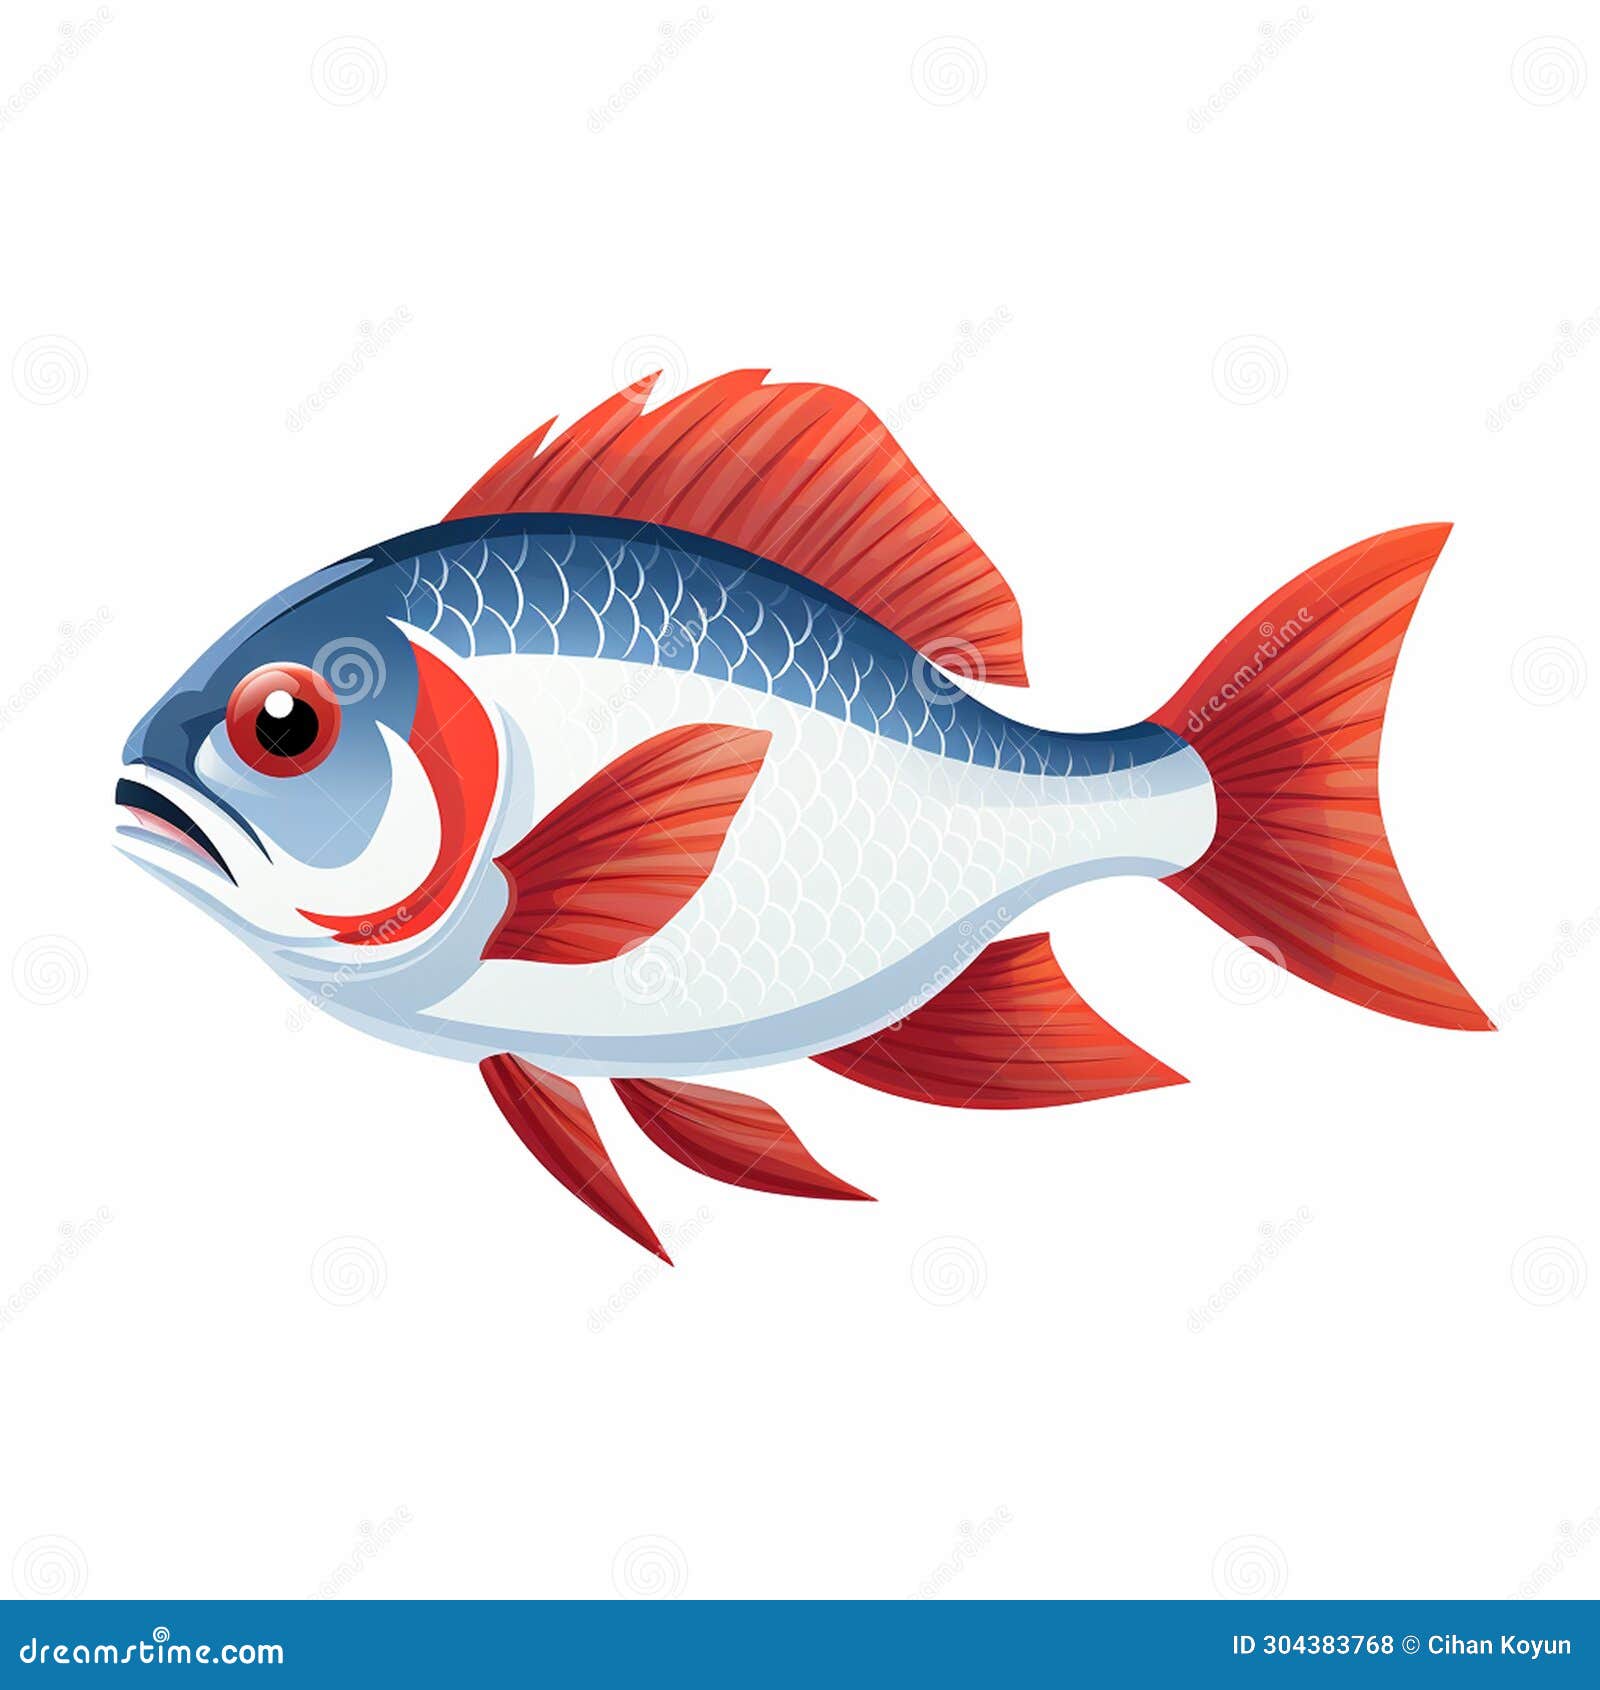 Glofish Betta Colors Anchovy Vector Rosy Reds Fish Albino Full Platinum  White Guppy Grey Cichlid Stock Vector - Illustration of polygonal,  tropical: 304383768